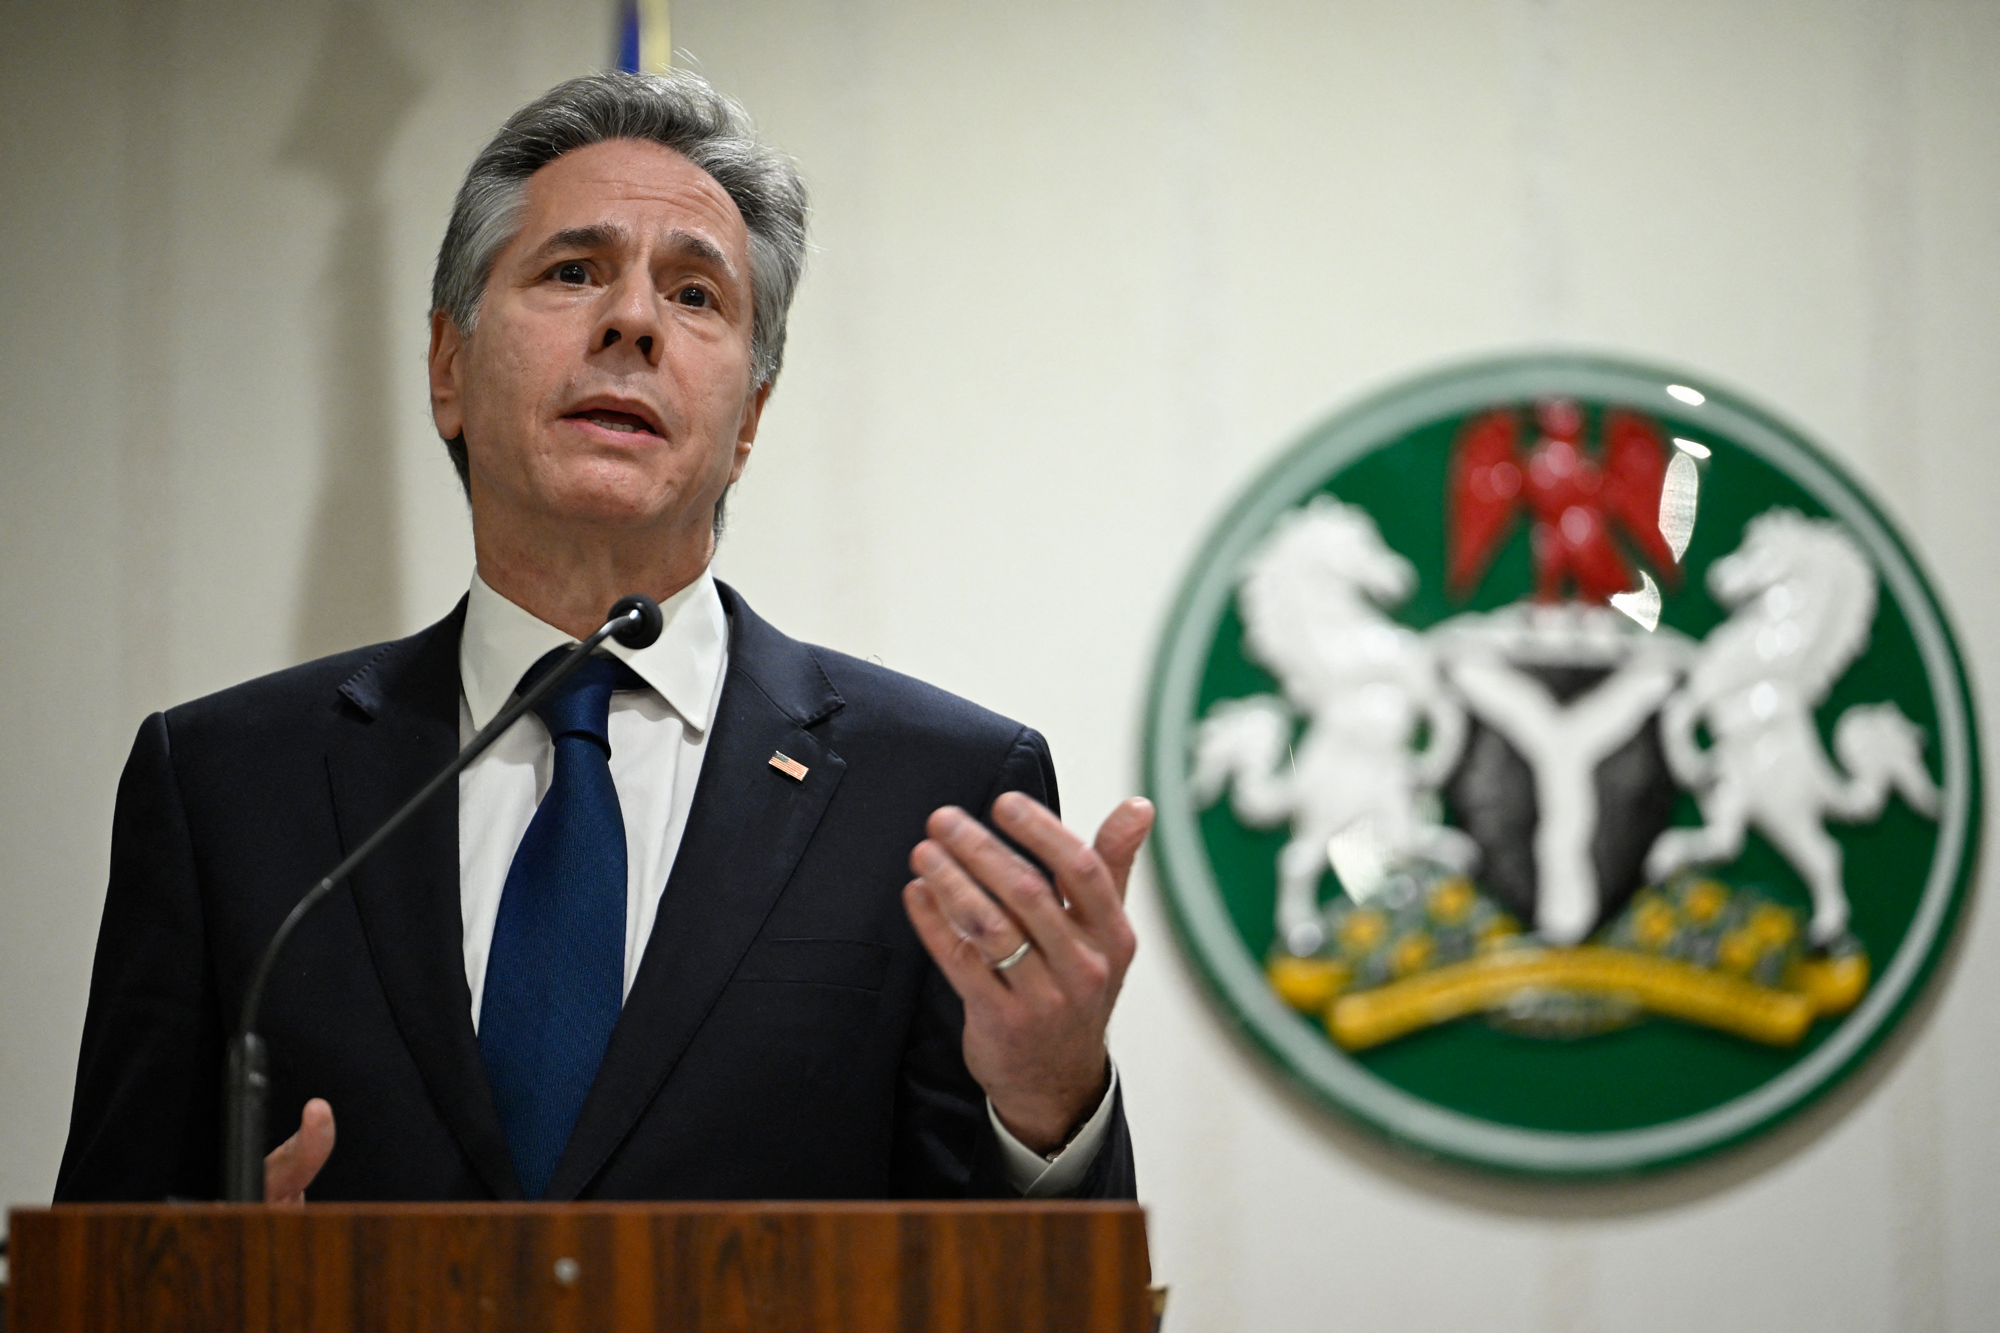 US Secretary of State Antony Blinken speaks during a press conference with Minister of Foreign Affairs of Nigeria Yusuf Tuggar at the Presidential Villa in Abuja, Nigeria, on January 23.